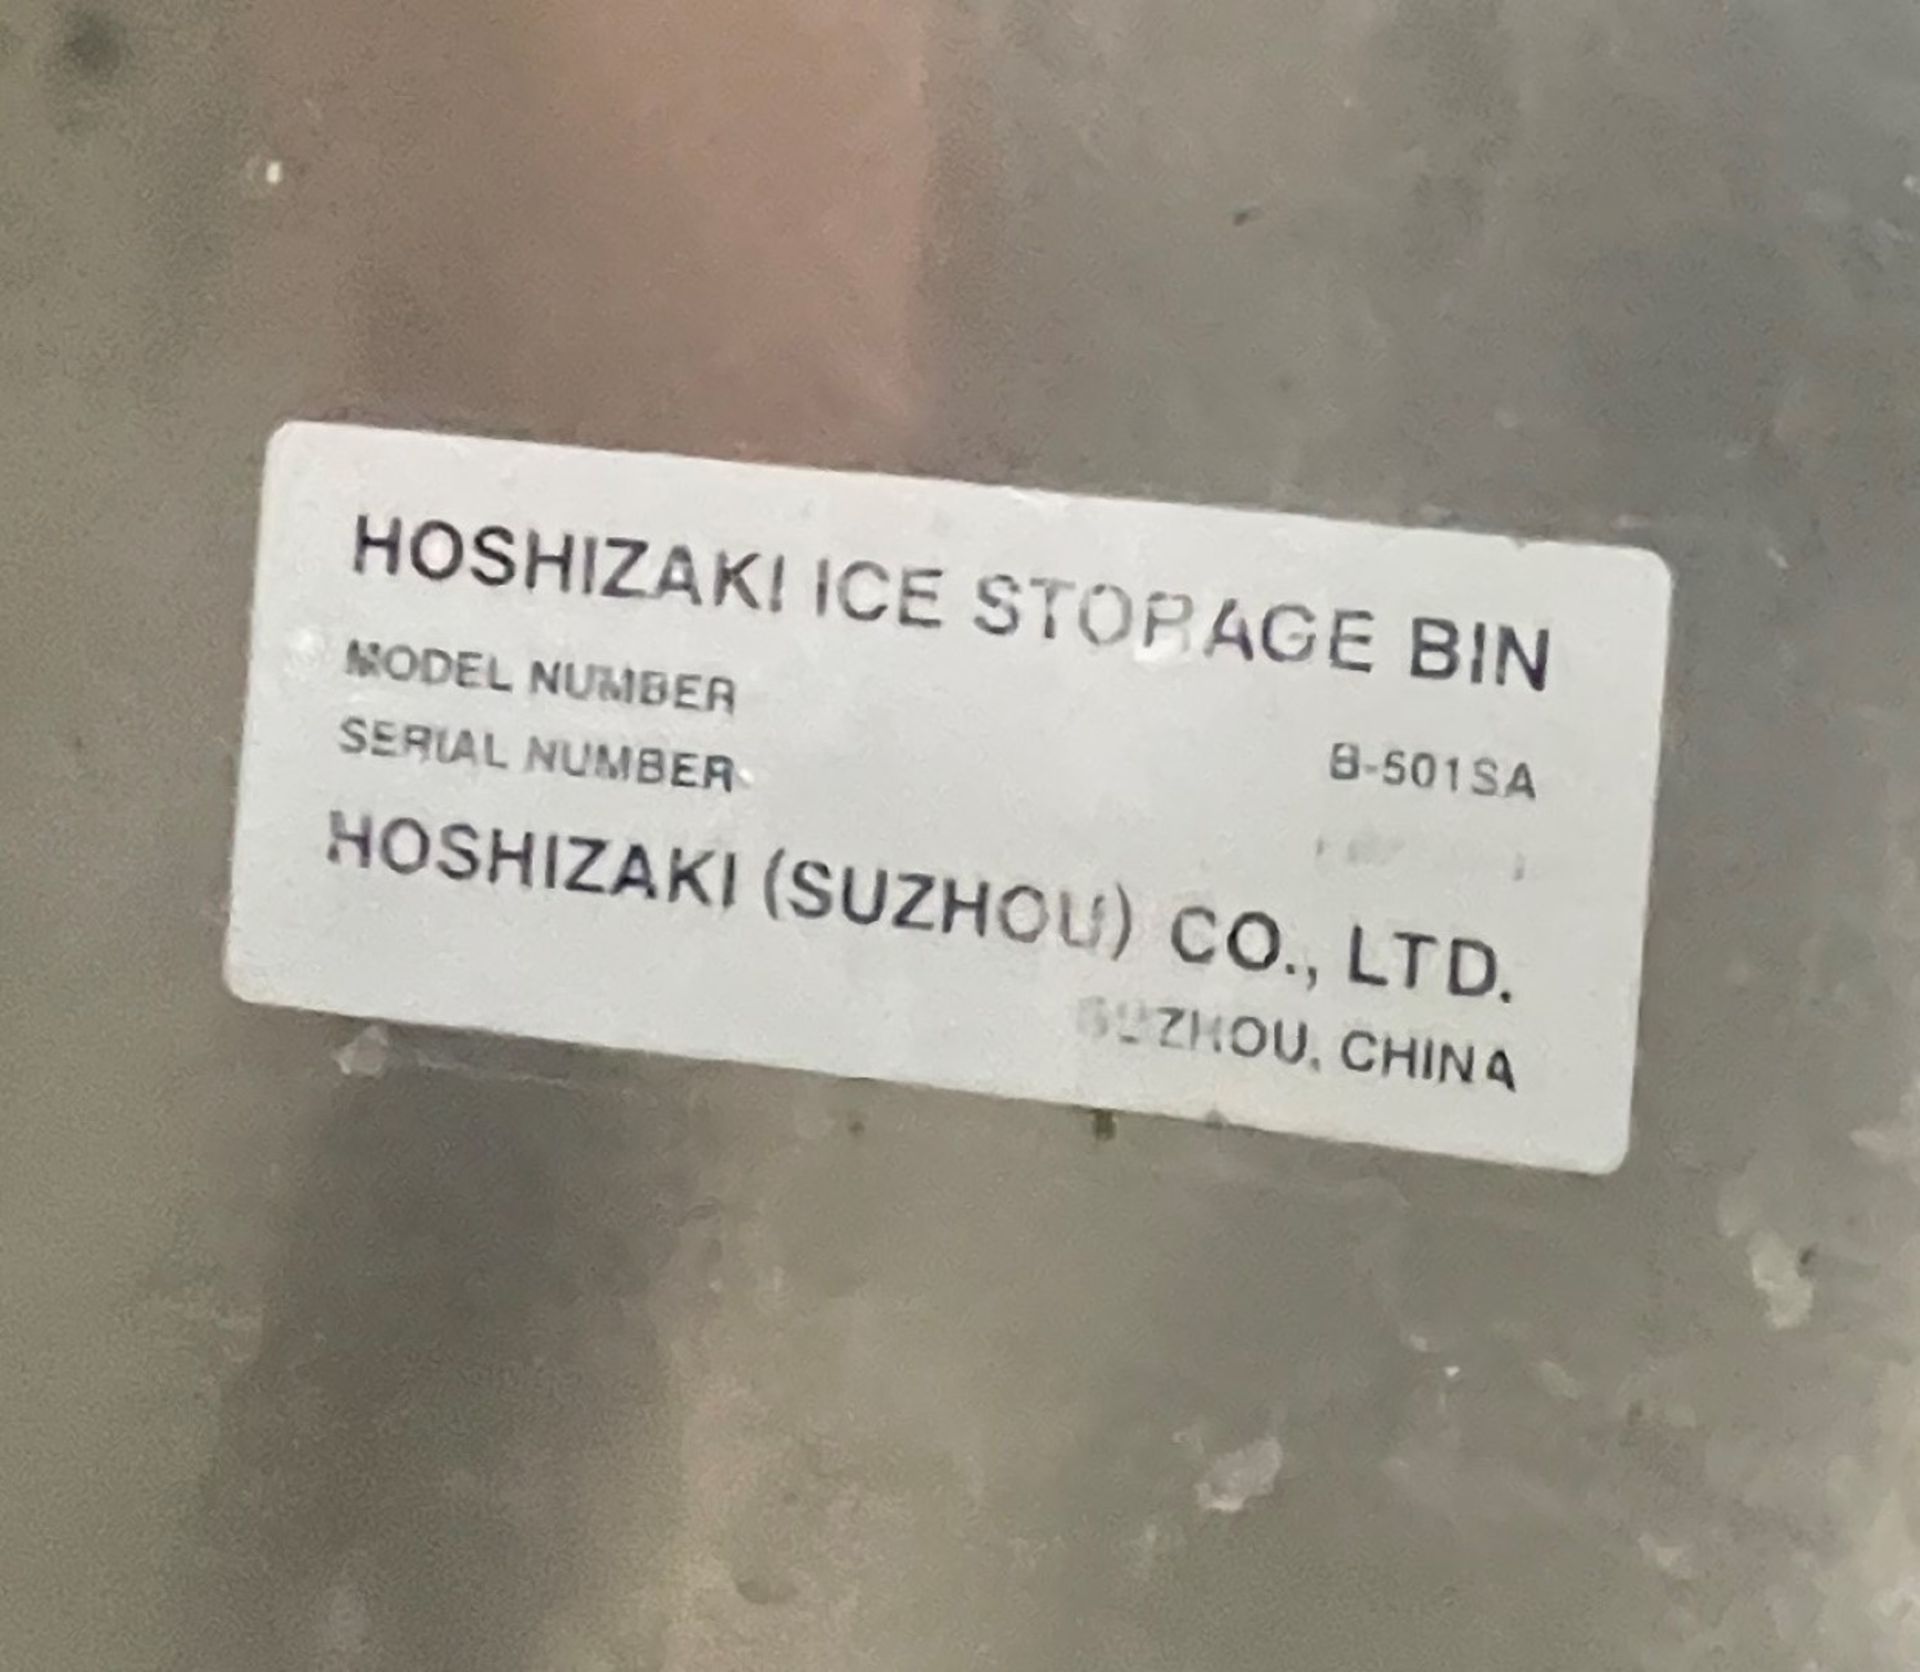 1 x Hoshizaki IM-240ANE Ice Cube Maker (240kg/24hr) With Ice Bin - Current Model - RRP £5,800 - Image 9 of 10